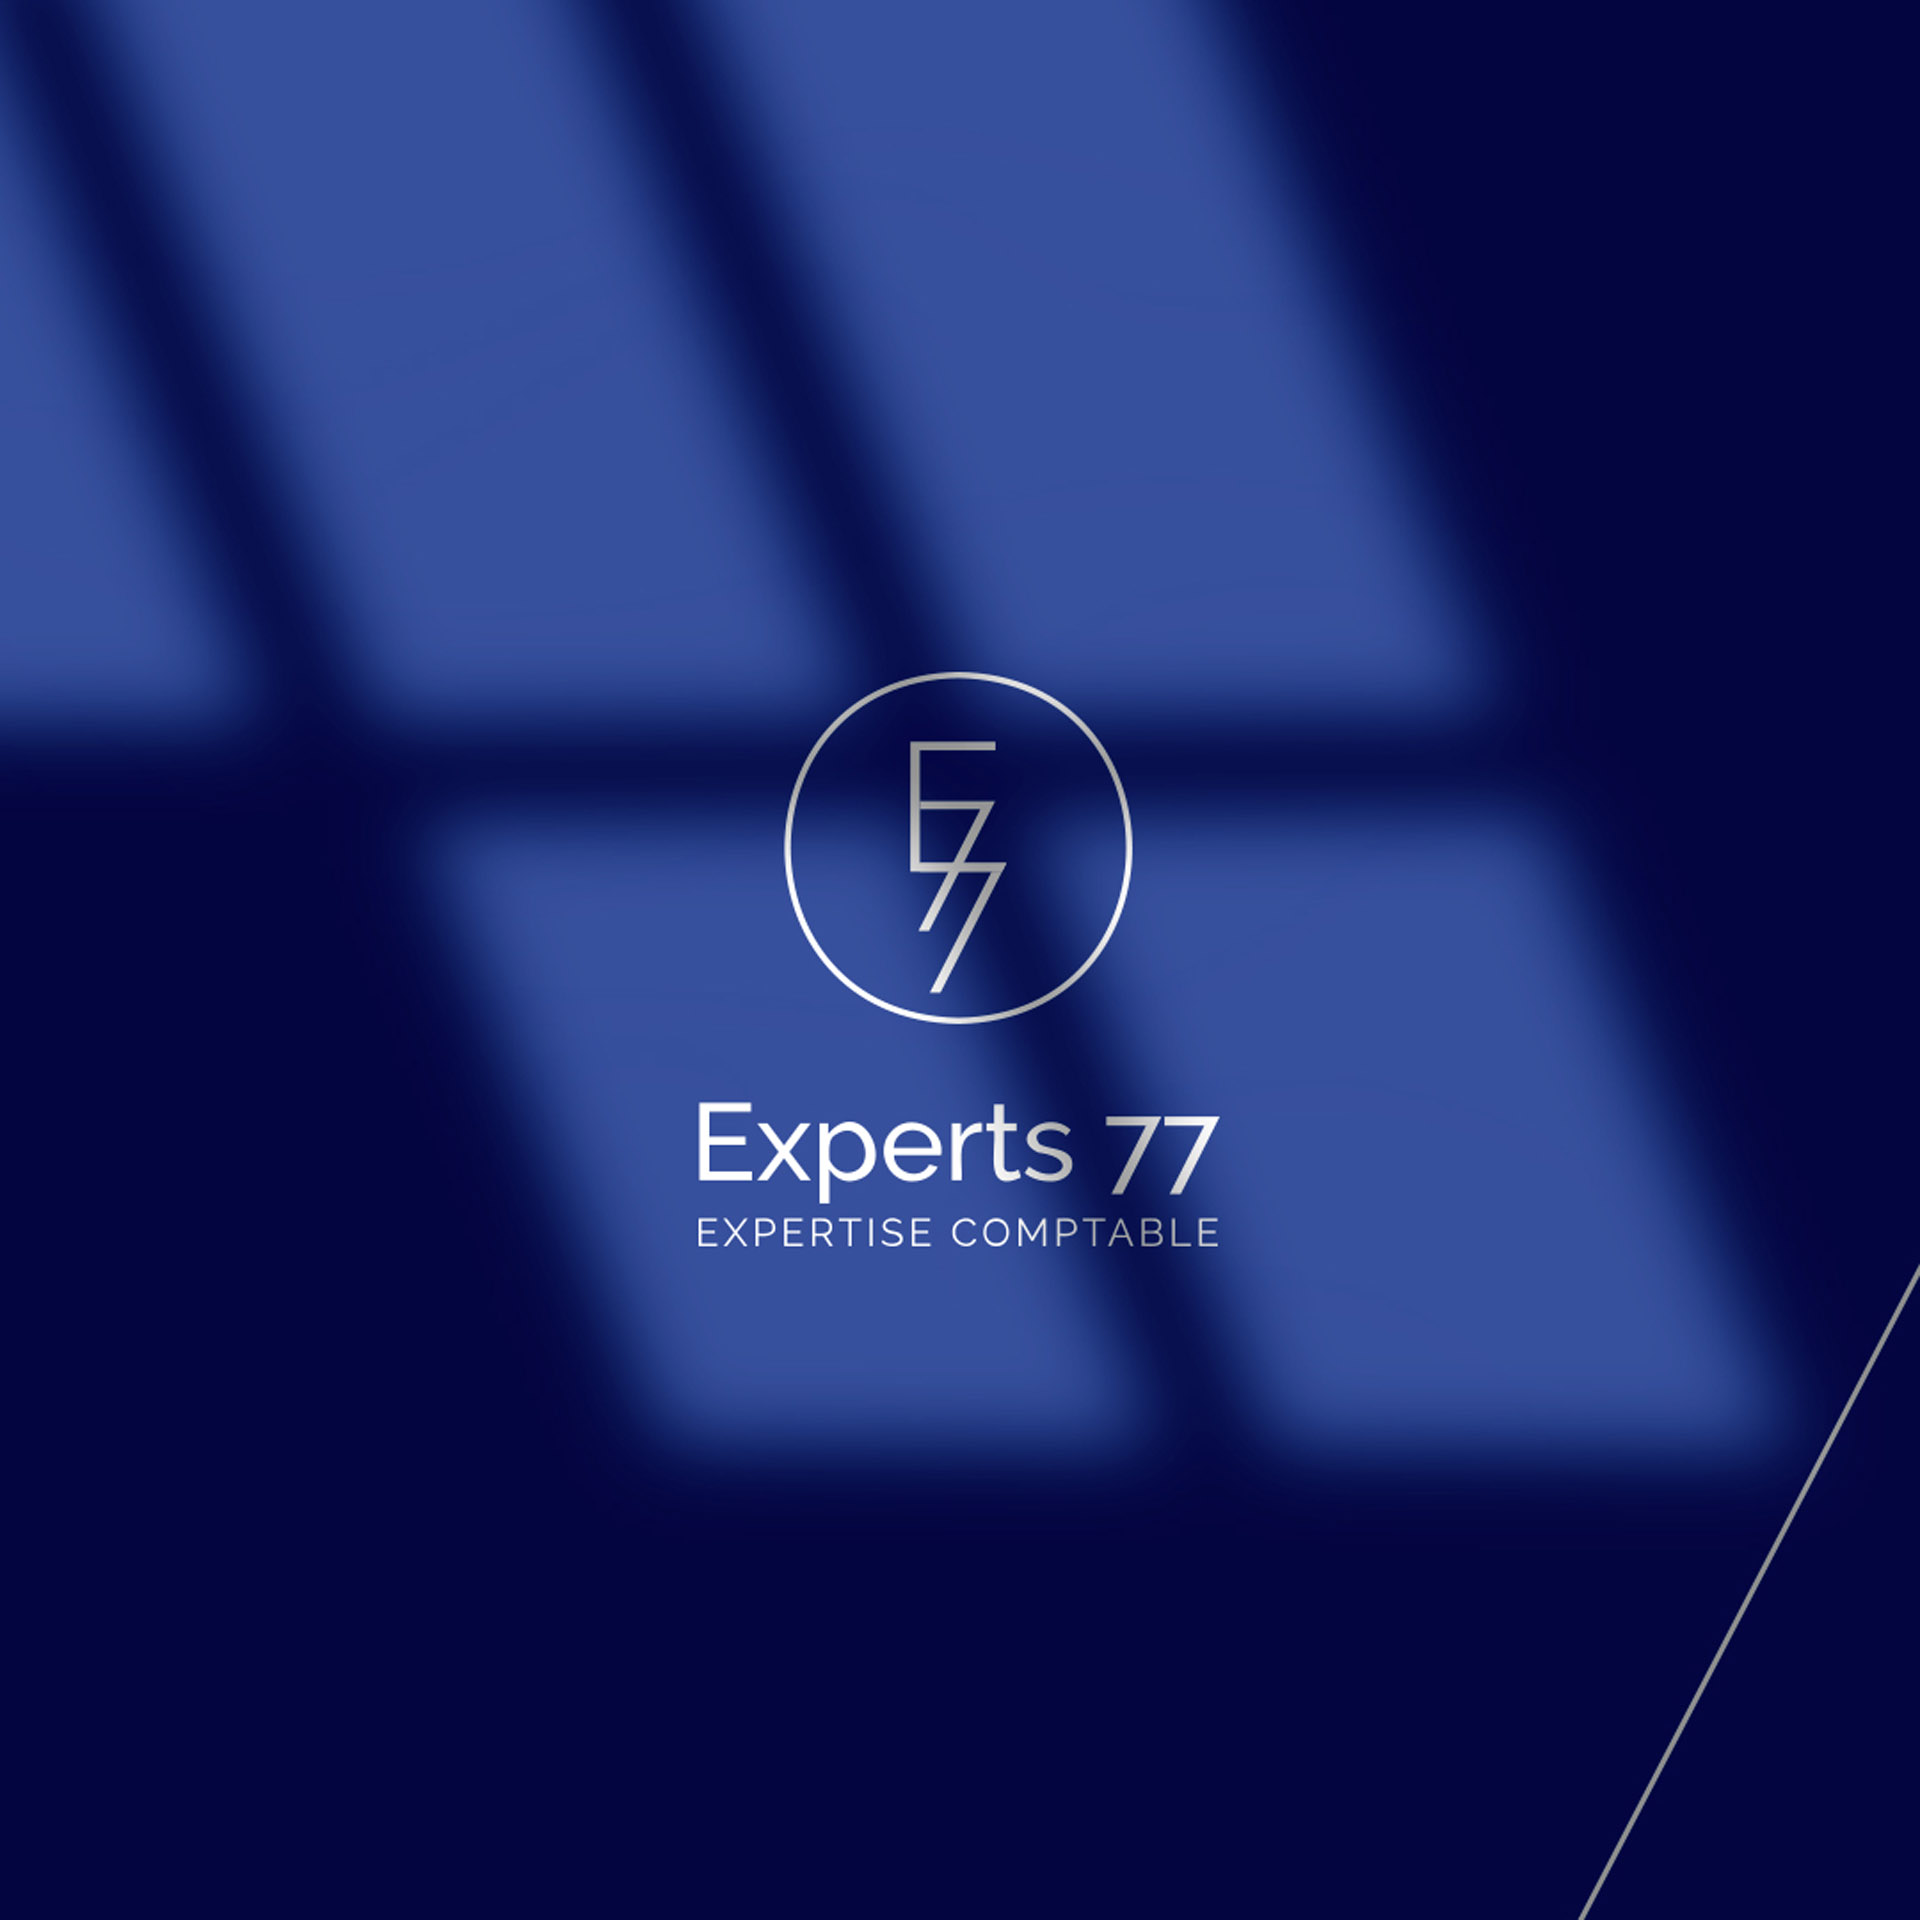 Experts 77 7